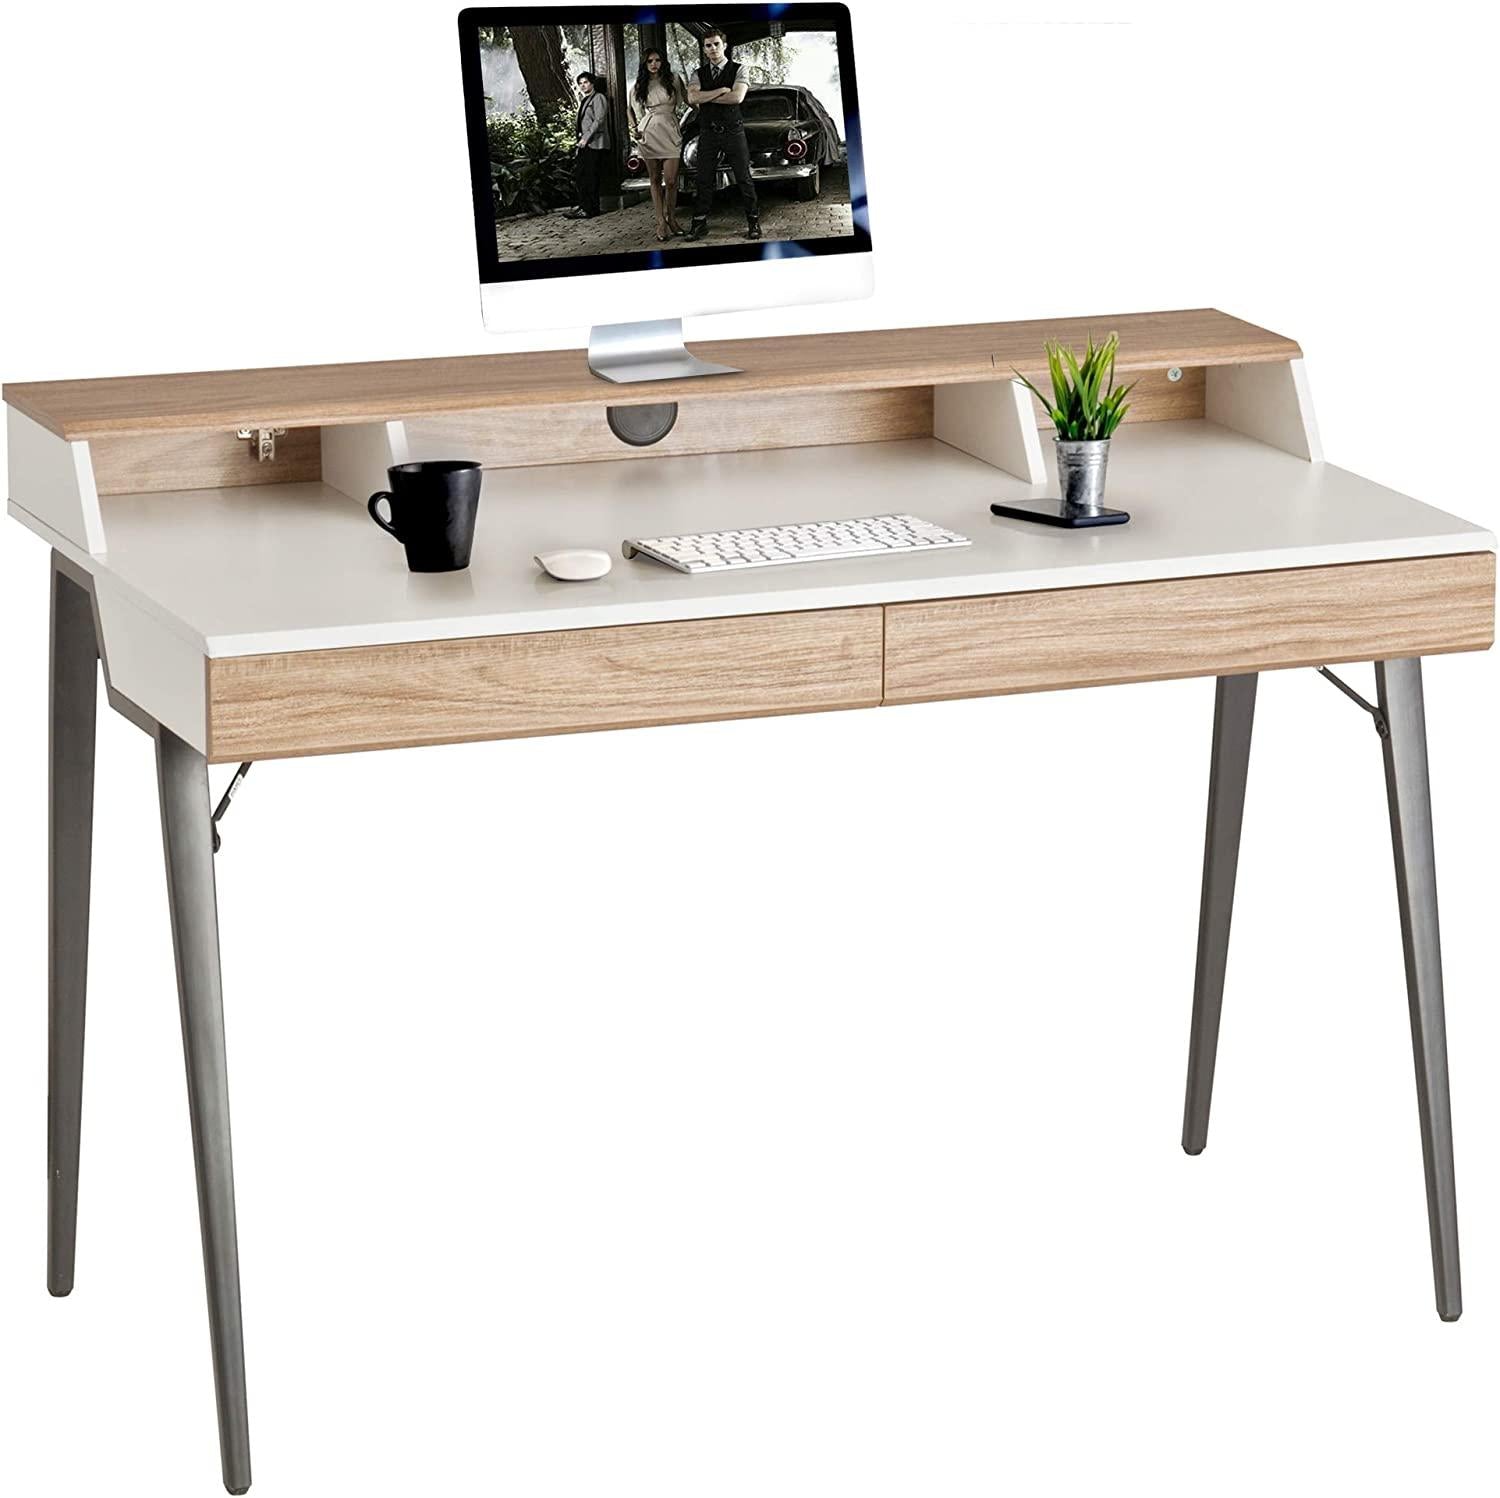 47" Computer Desk White Wood Small Writing Table with Monitor,  Drawers & Storage  Study